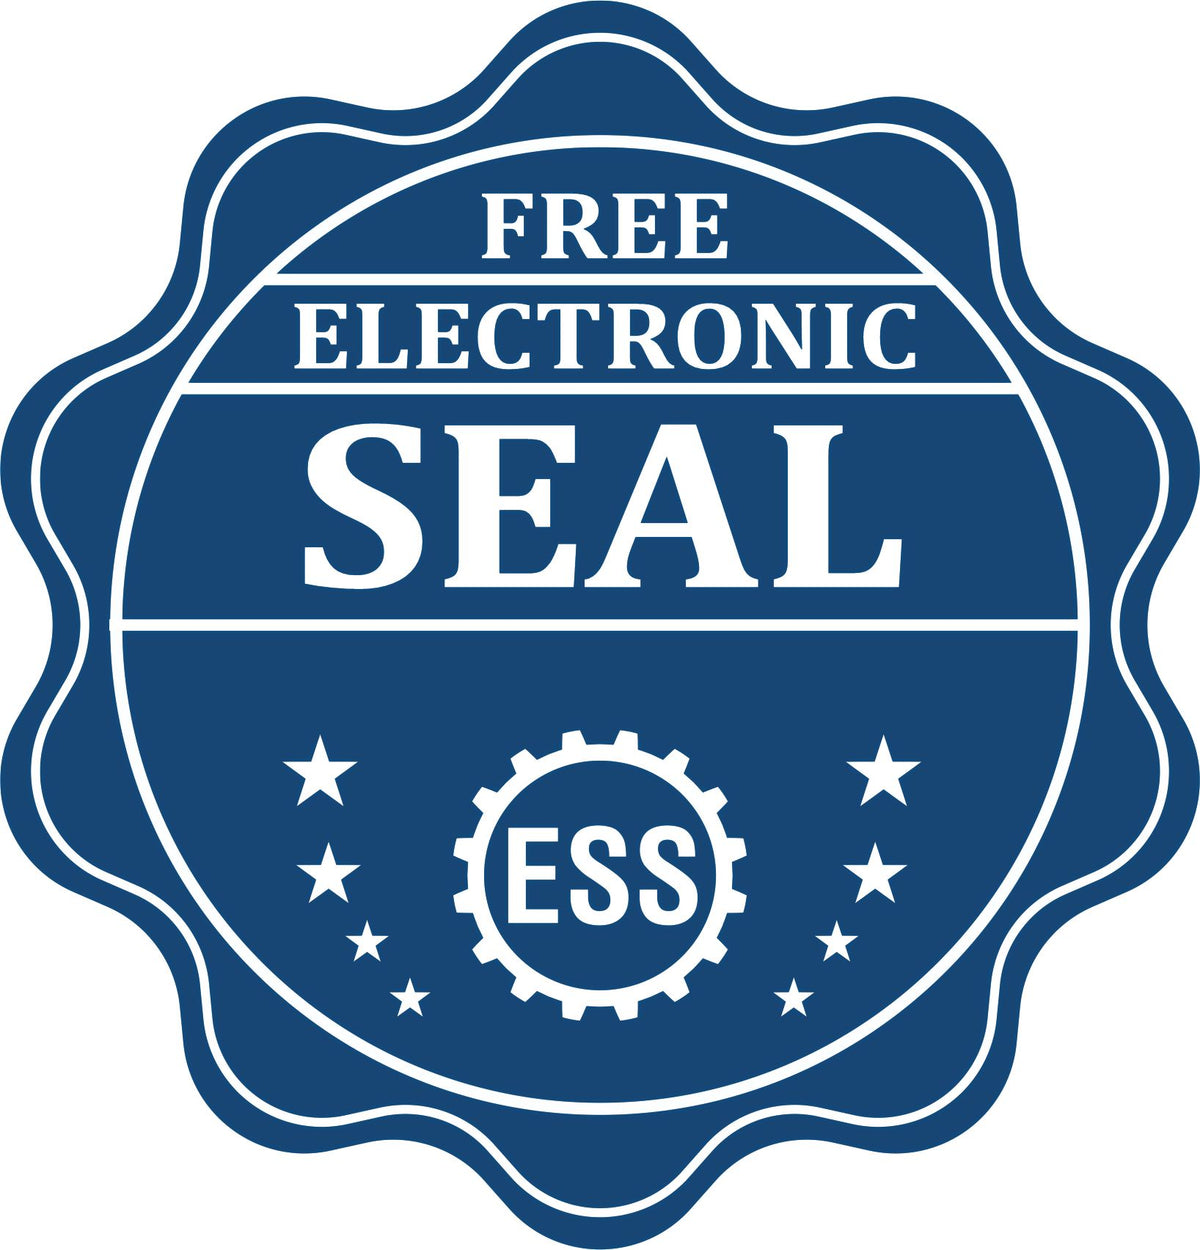 A badge showing a free electronic seal for the Heavy Duty Cast Iron South Dakota Architect Embosser with stars and the ESS gear on the emblem.